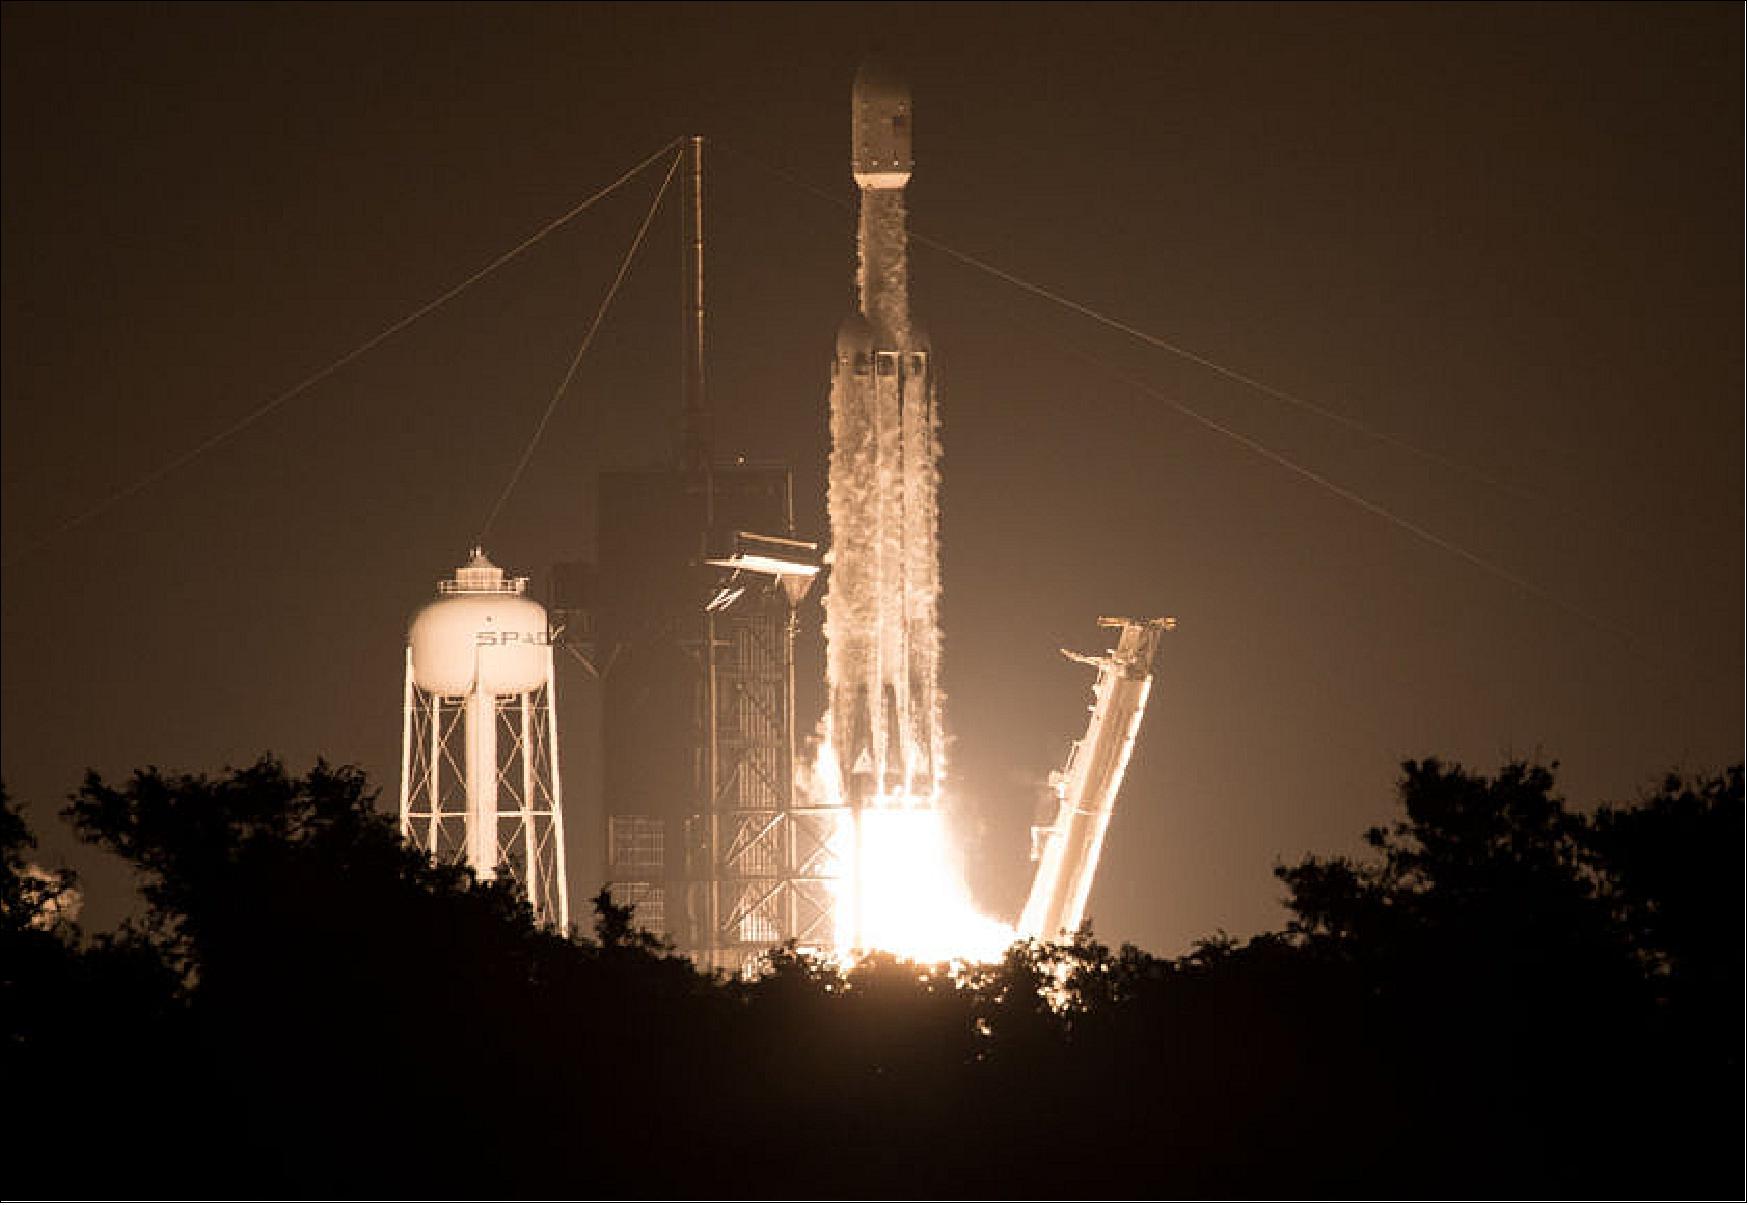 Figure 5: SpaceX's Falcon Heavy rocket, carrying GPIM and 23 other spacecraft for the U.S. Air Force's STP-2 mission, lifts off from Kennedy Space Center on 25 June 2019 at 06:30 UTC. The satellites include four NASA technology and science payloads that will study non-toxic spacecraft fuel, deep space navigation, "bubbles" in the electrically-charged layers of Earth's upper atmosphere, and radiation protection for satellites (image credit: NASA) 14)